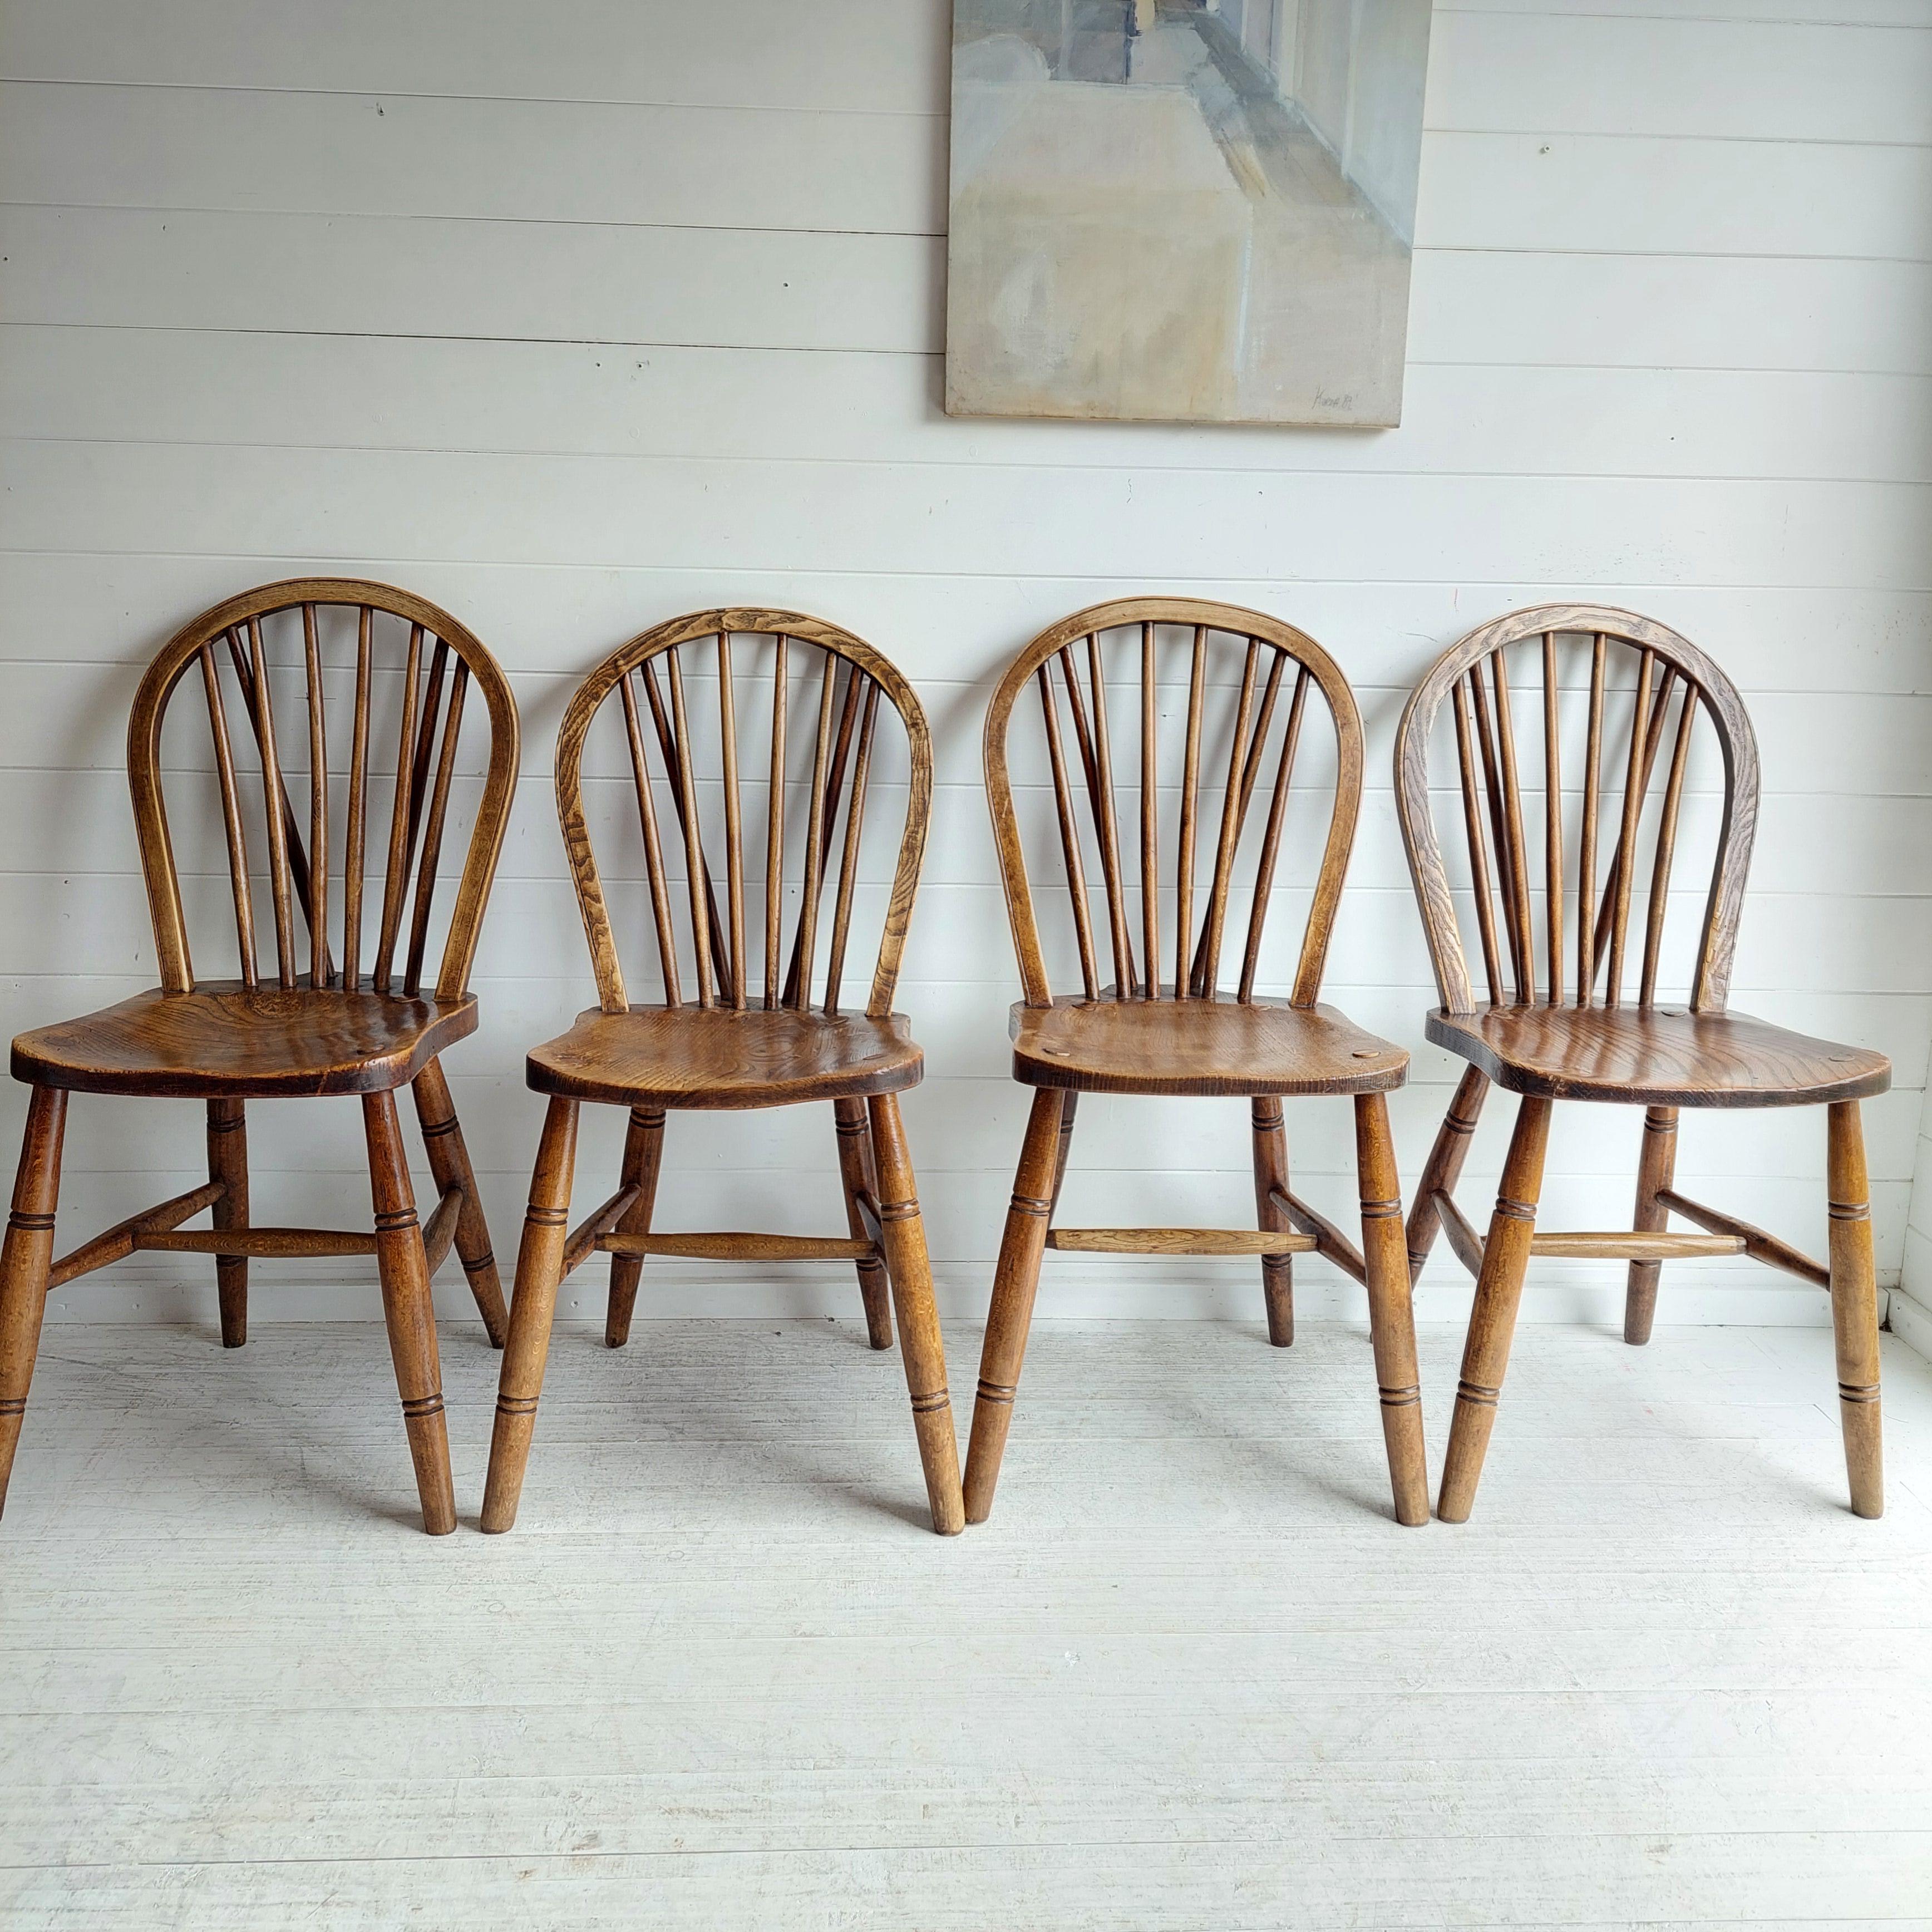 Vintage 4 High Wycombe Elm spindle hoop Back Windsor dining Chairs, 1942 For Sale 6